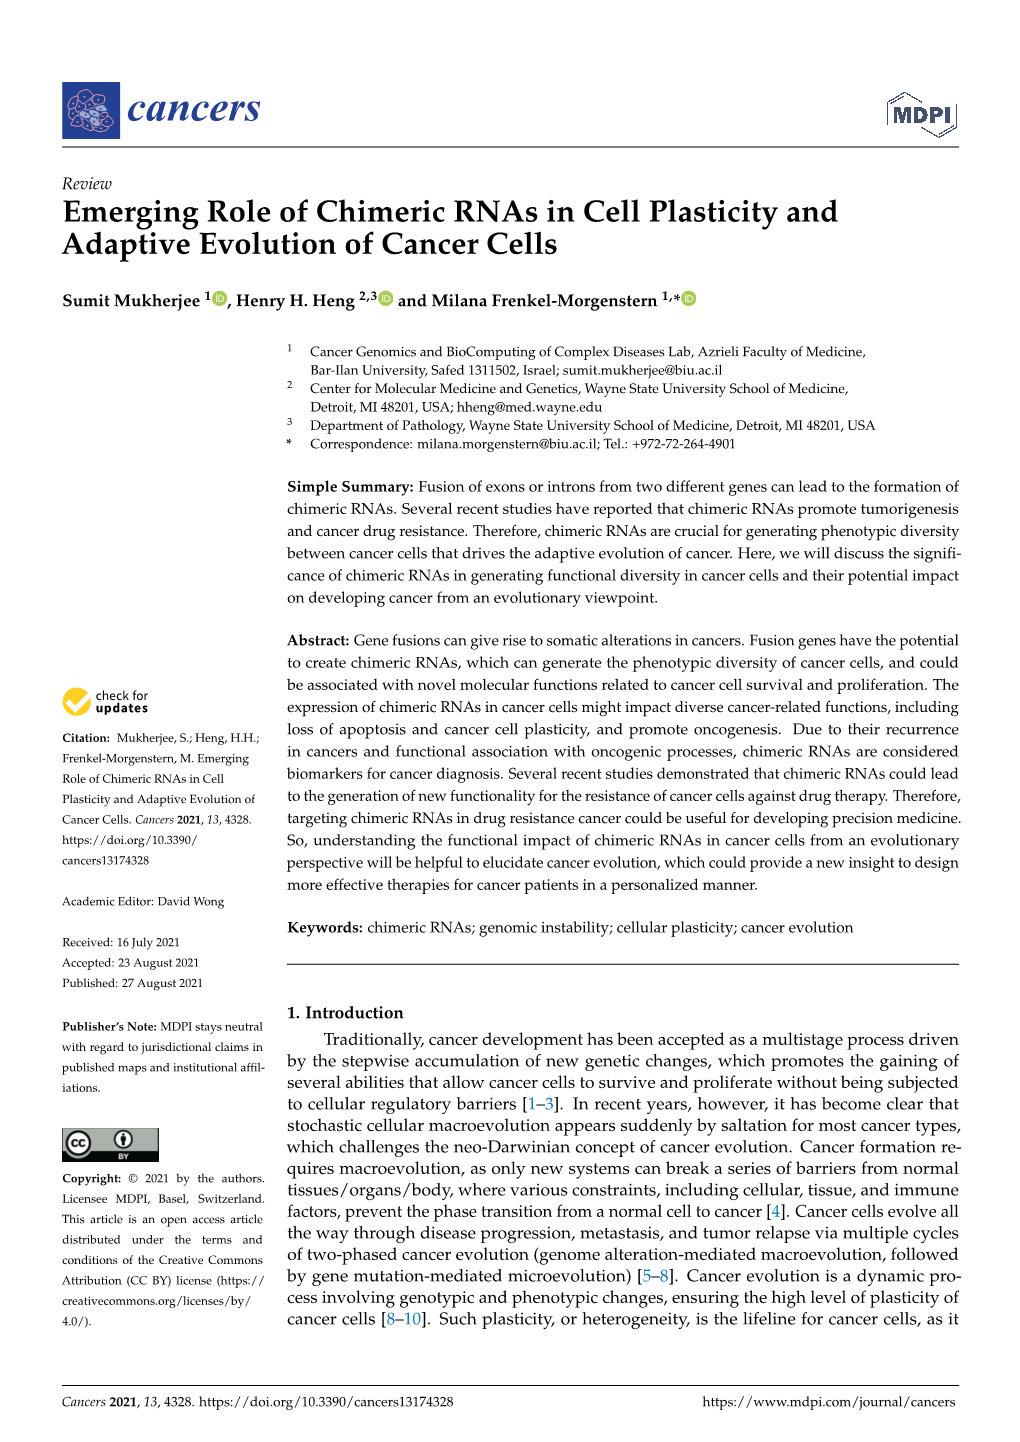 Emerging Role of Chimeric Rnas in Cell Plasticity and Adaptive Evolution of Cancer Cells